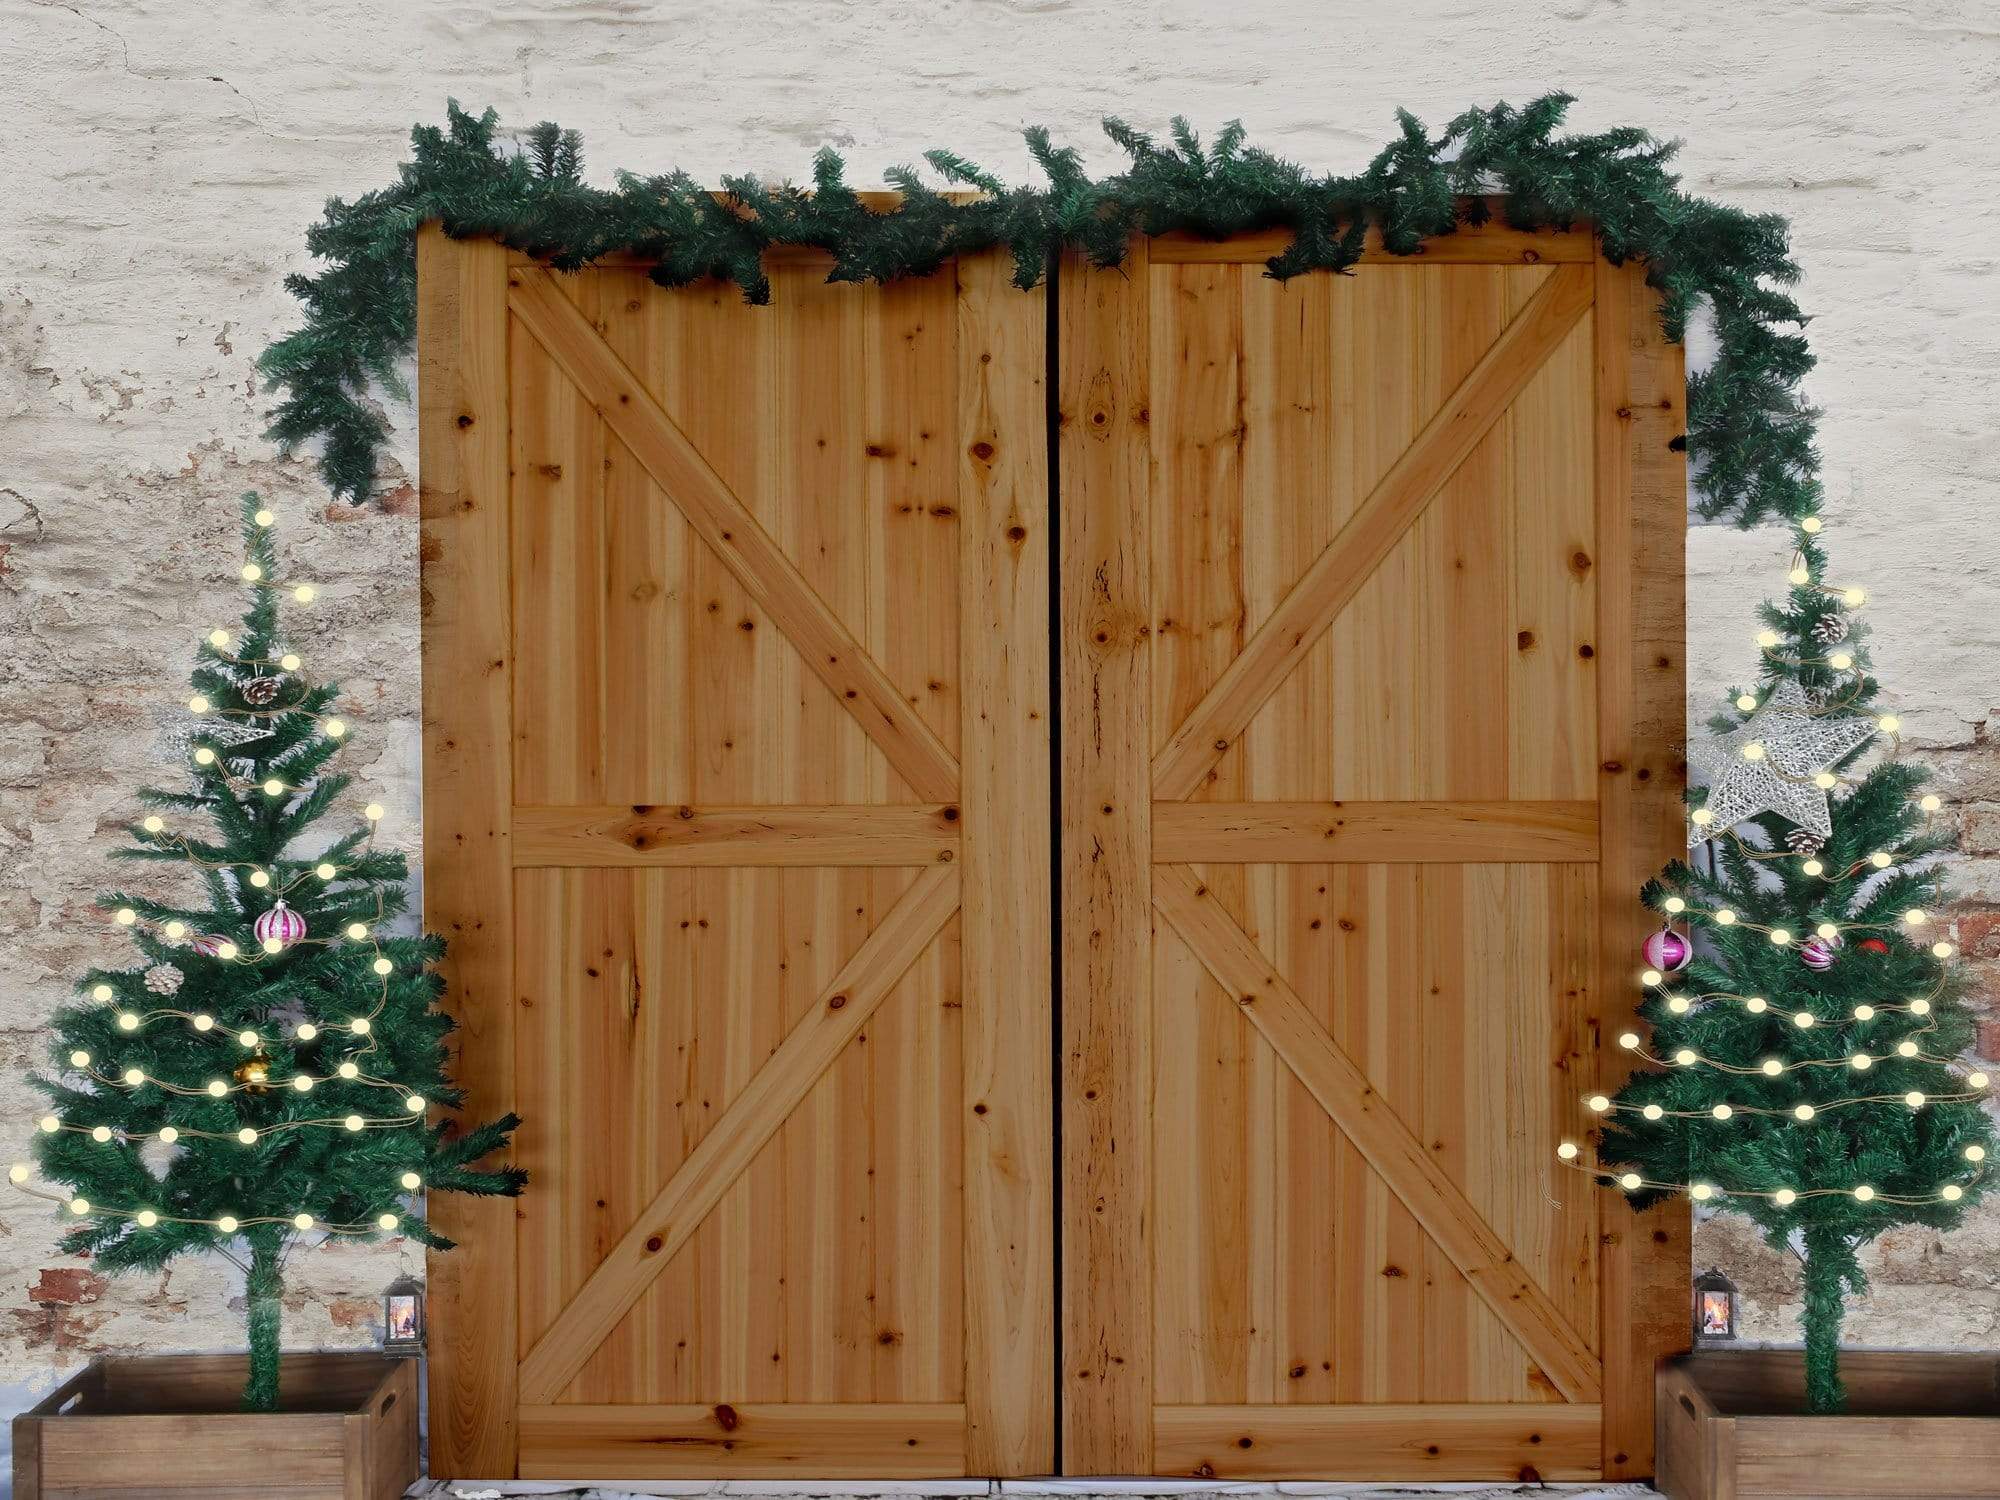 Kate Christmas Wood Door Decorations Damaged Wall Backdrop Designed By Jerry_Sina